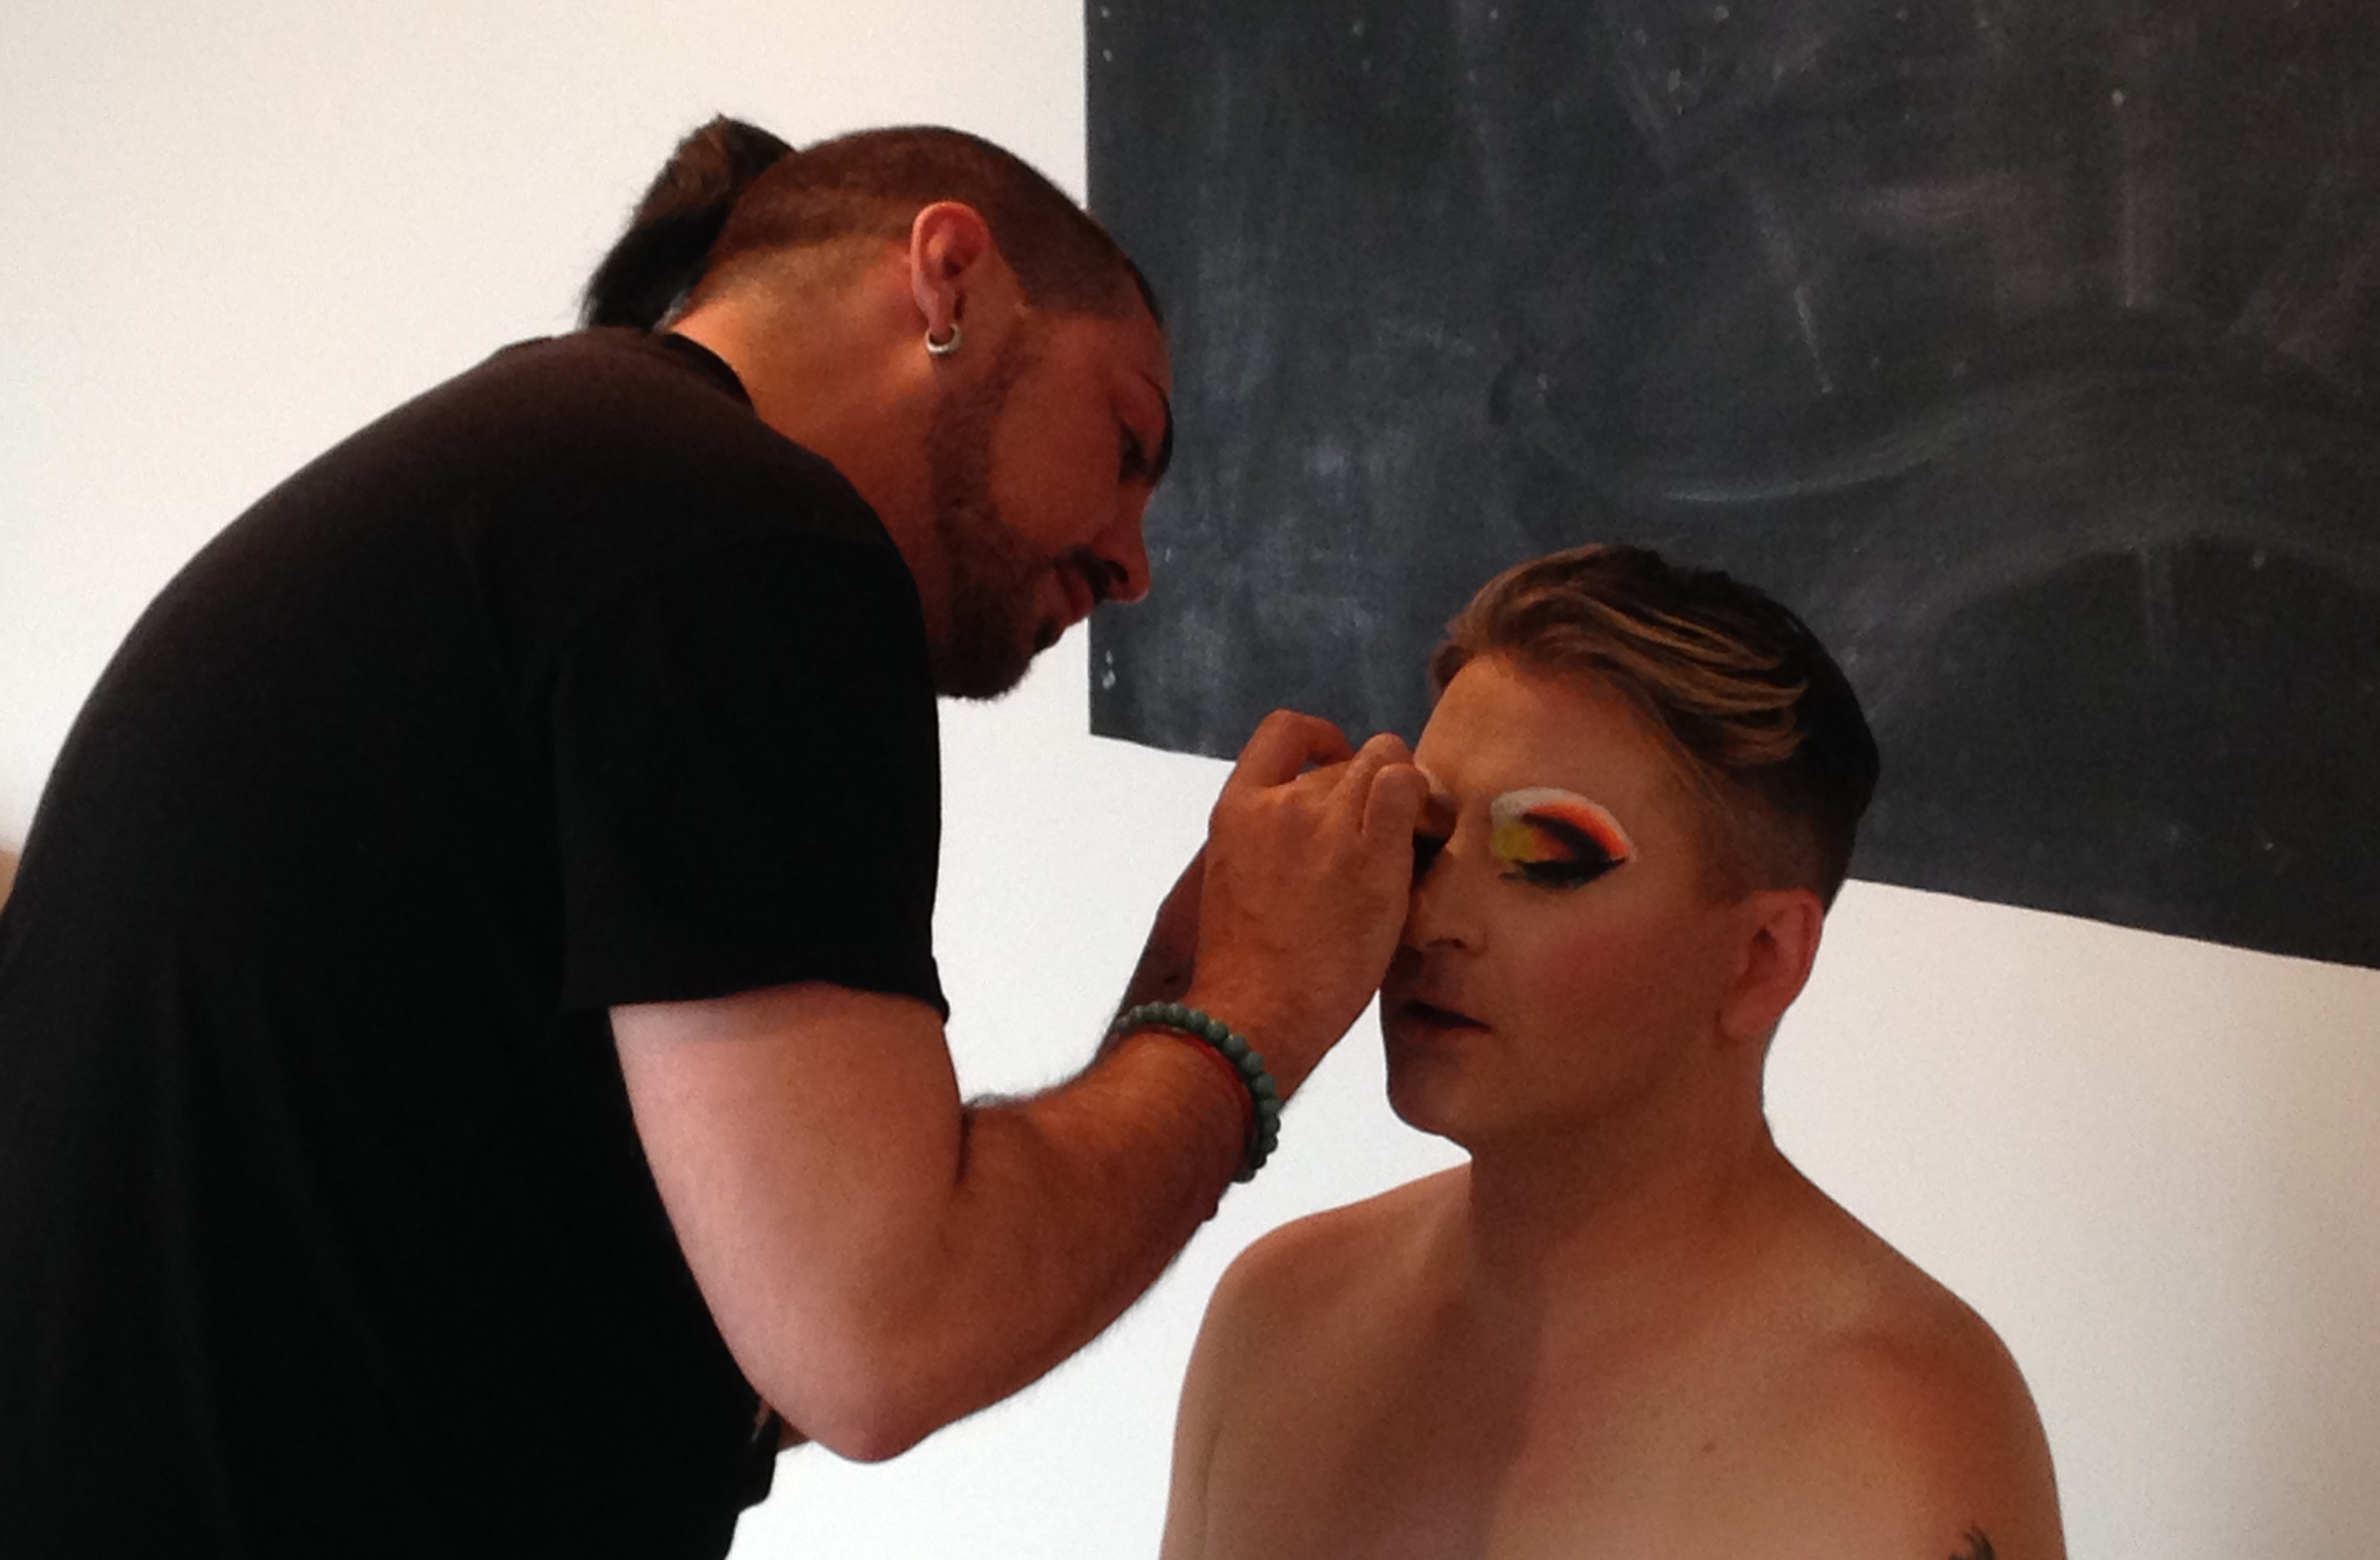 Make-up artist Ricky getting our Dame Matt Crosby ready for photographs